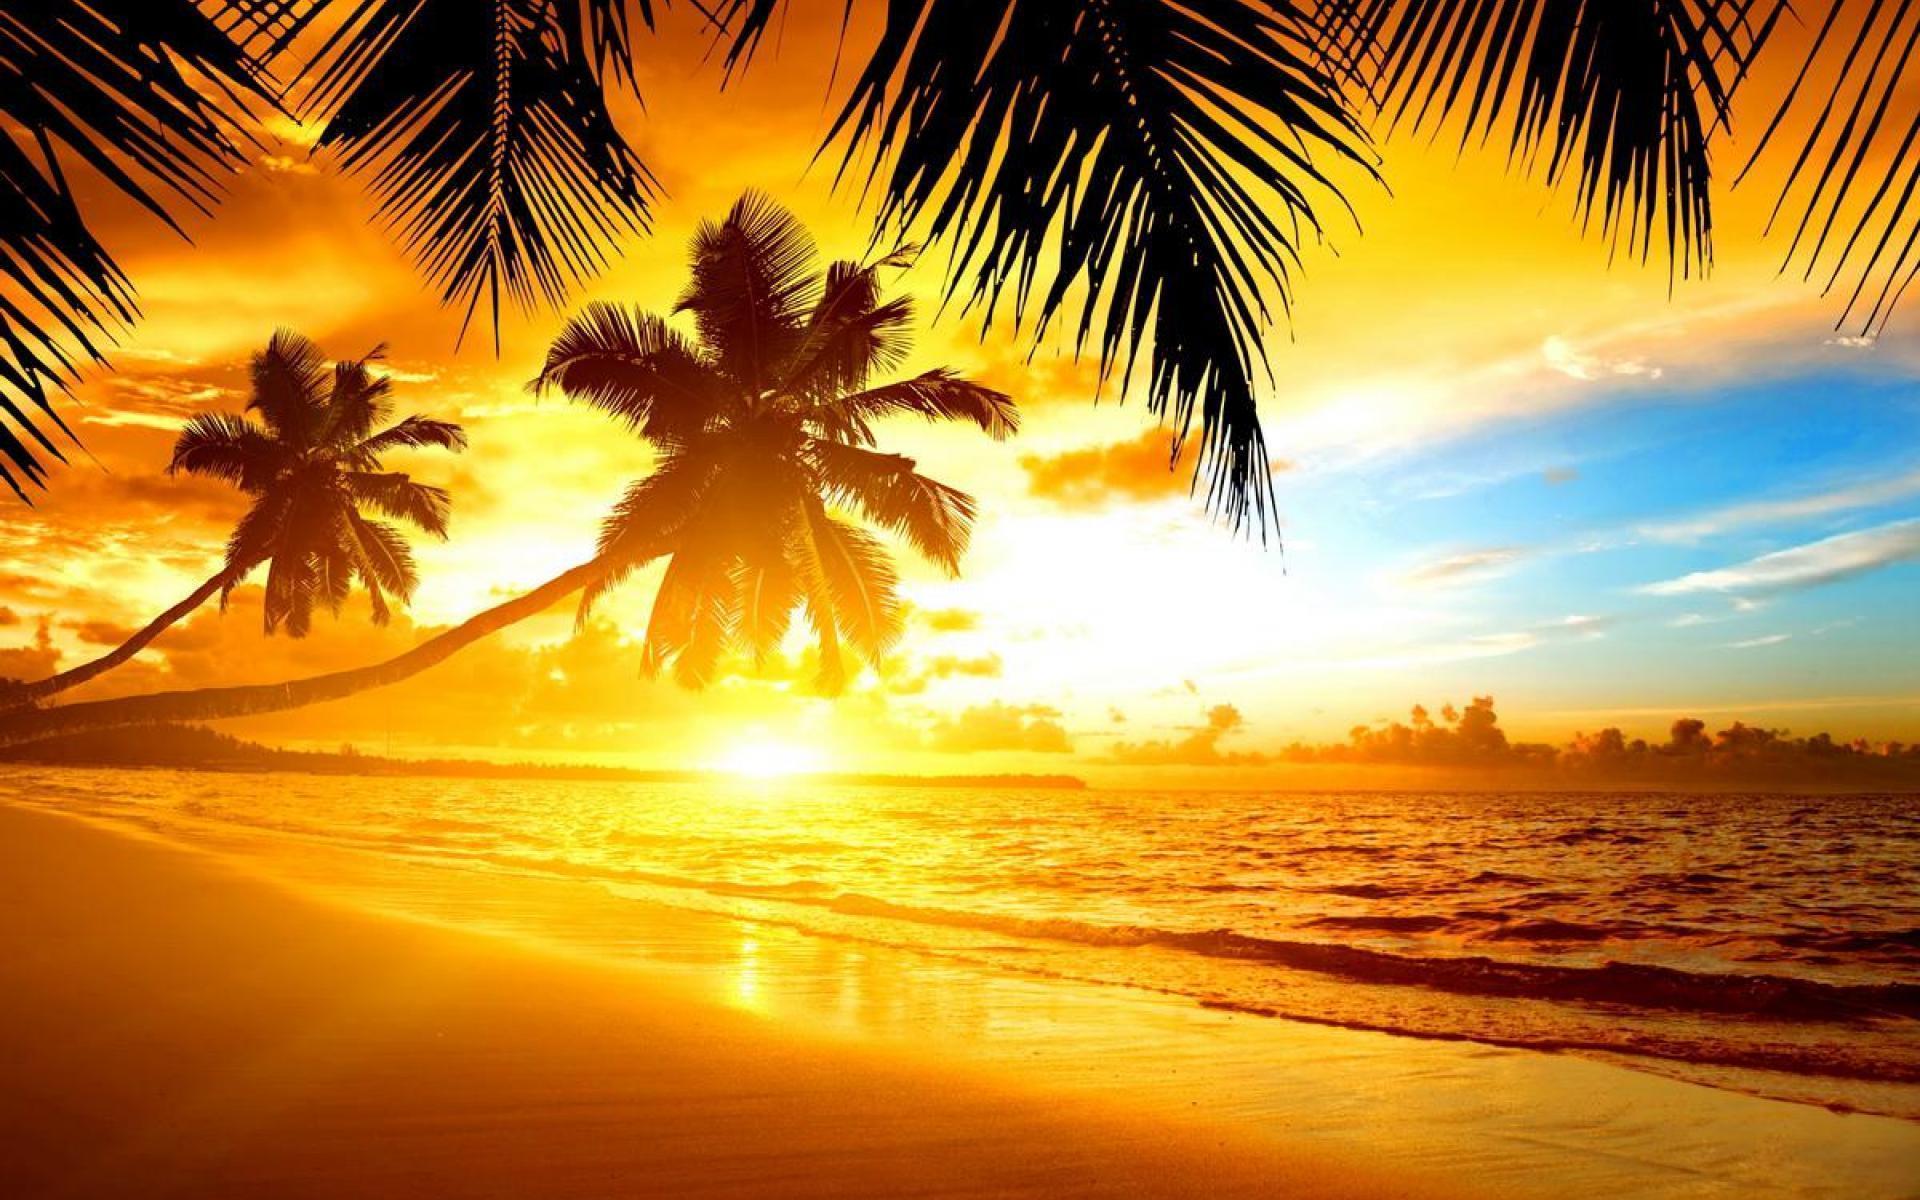 Download Island Sunset Wallpapers Top Free Island Sunset Backgrounds Wallpaperaccess